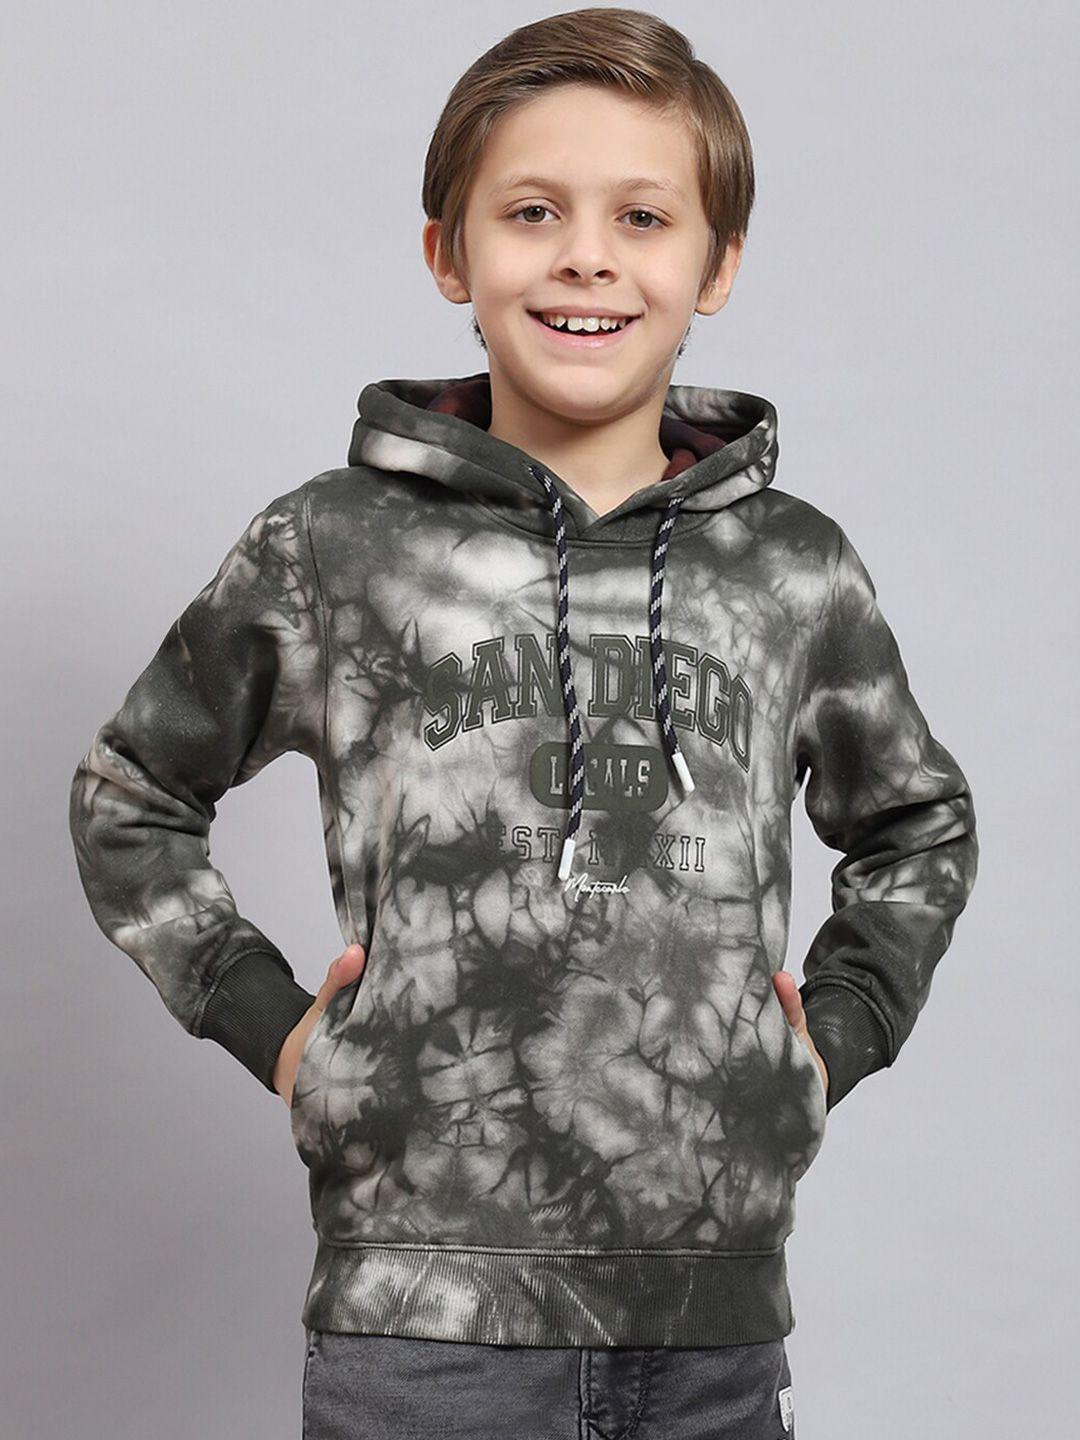 monte carlo boys abstract printed hooded pullover